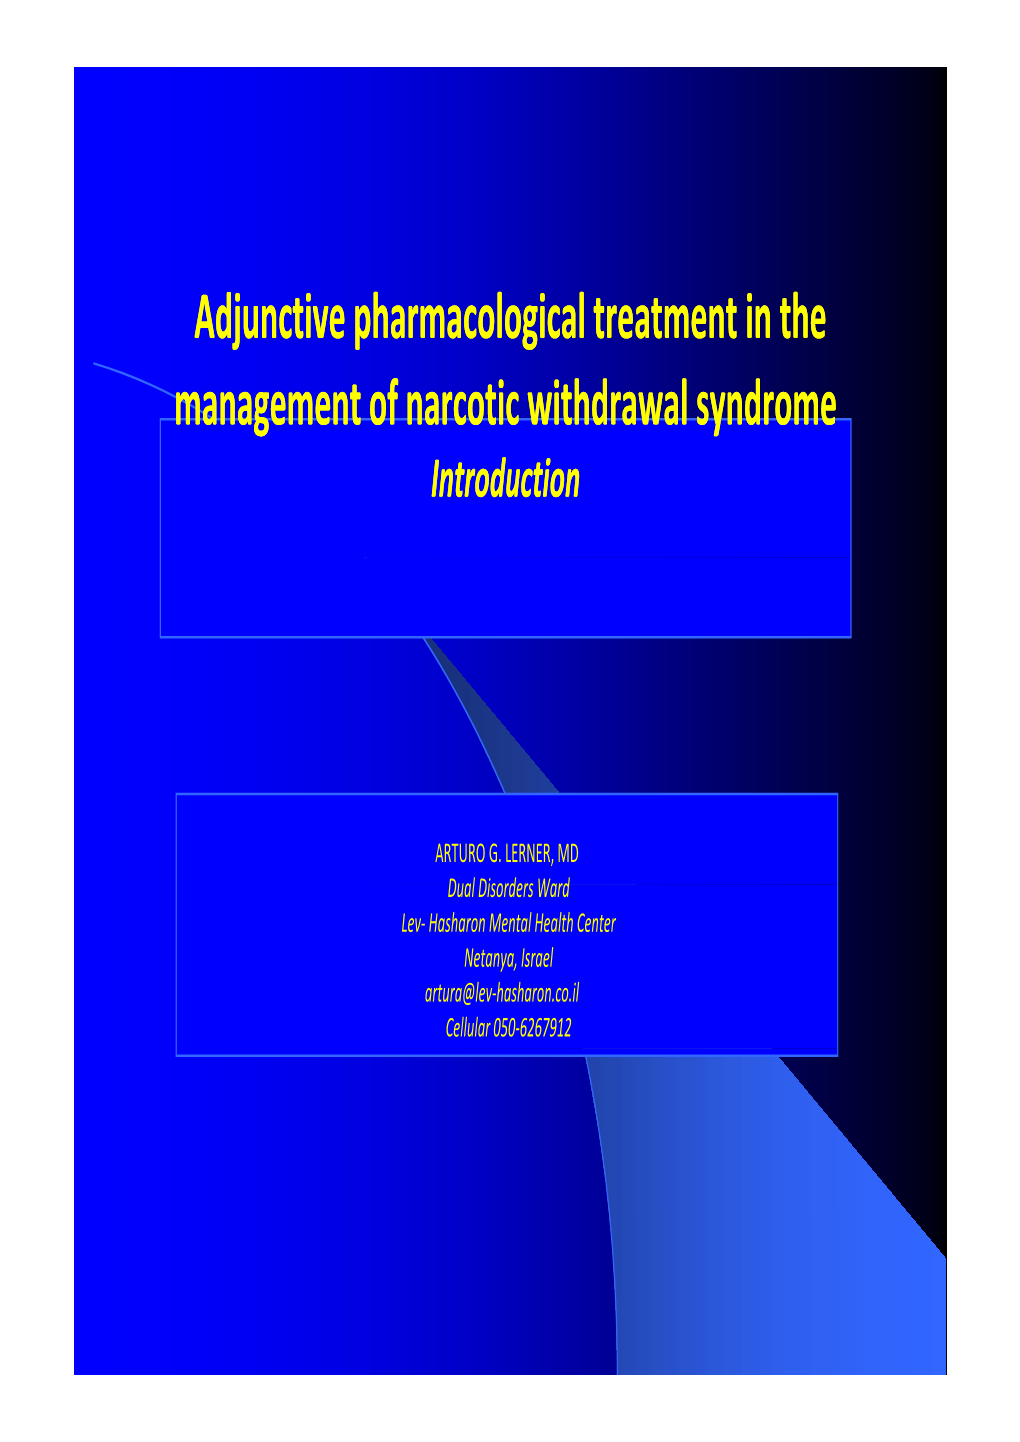 Adjunctive Pharmacological Treatment in the Management of Narcotic Withdrawal Syndrome Introduction